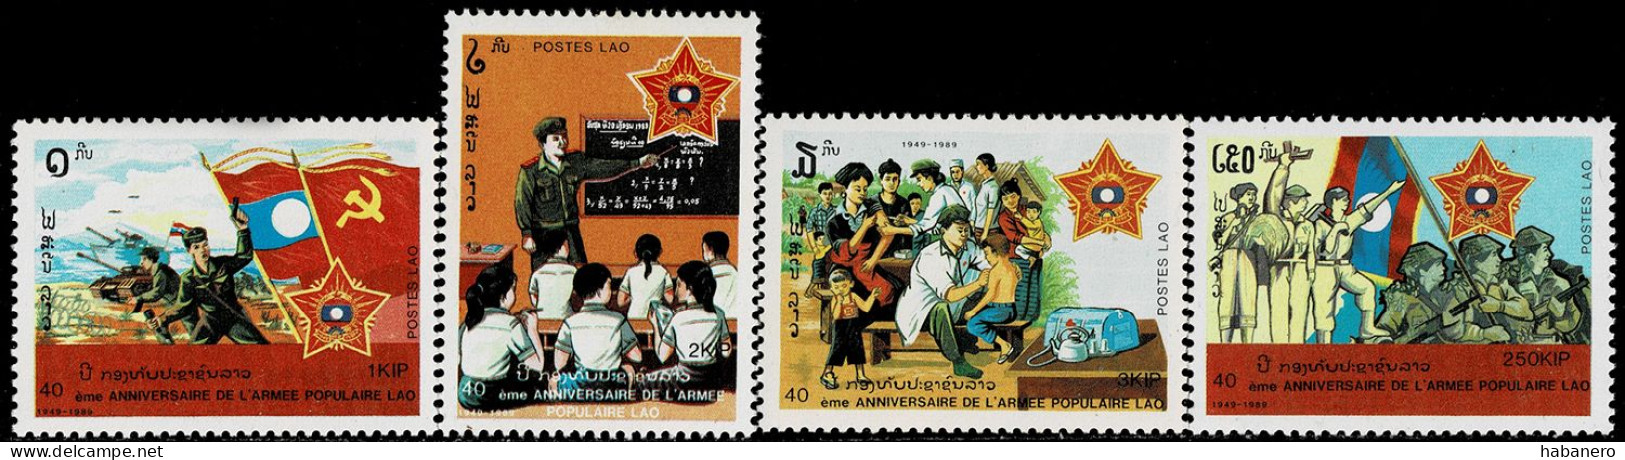 LAOS 1989 Mi 1131-1134 40th ANNIVERSARY OF THE PEOPLE'S ARMY MINT STAMPS ** - Laos